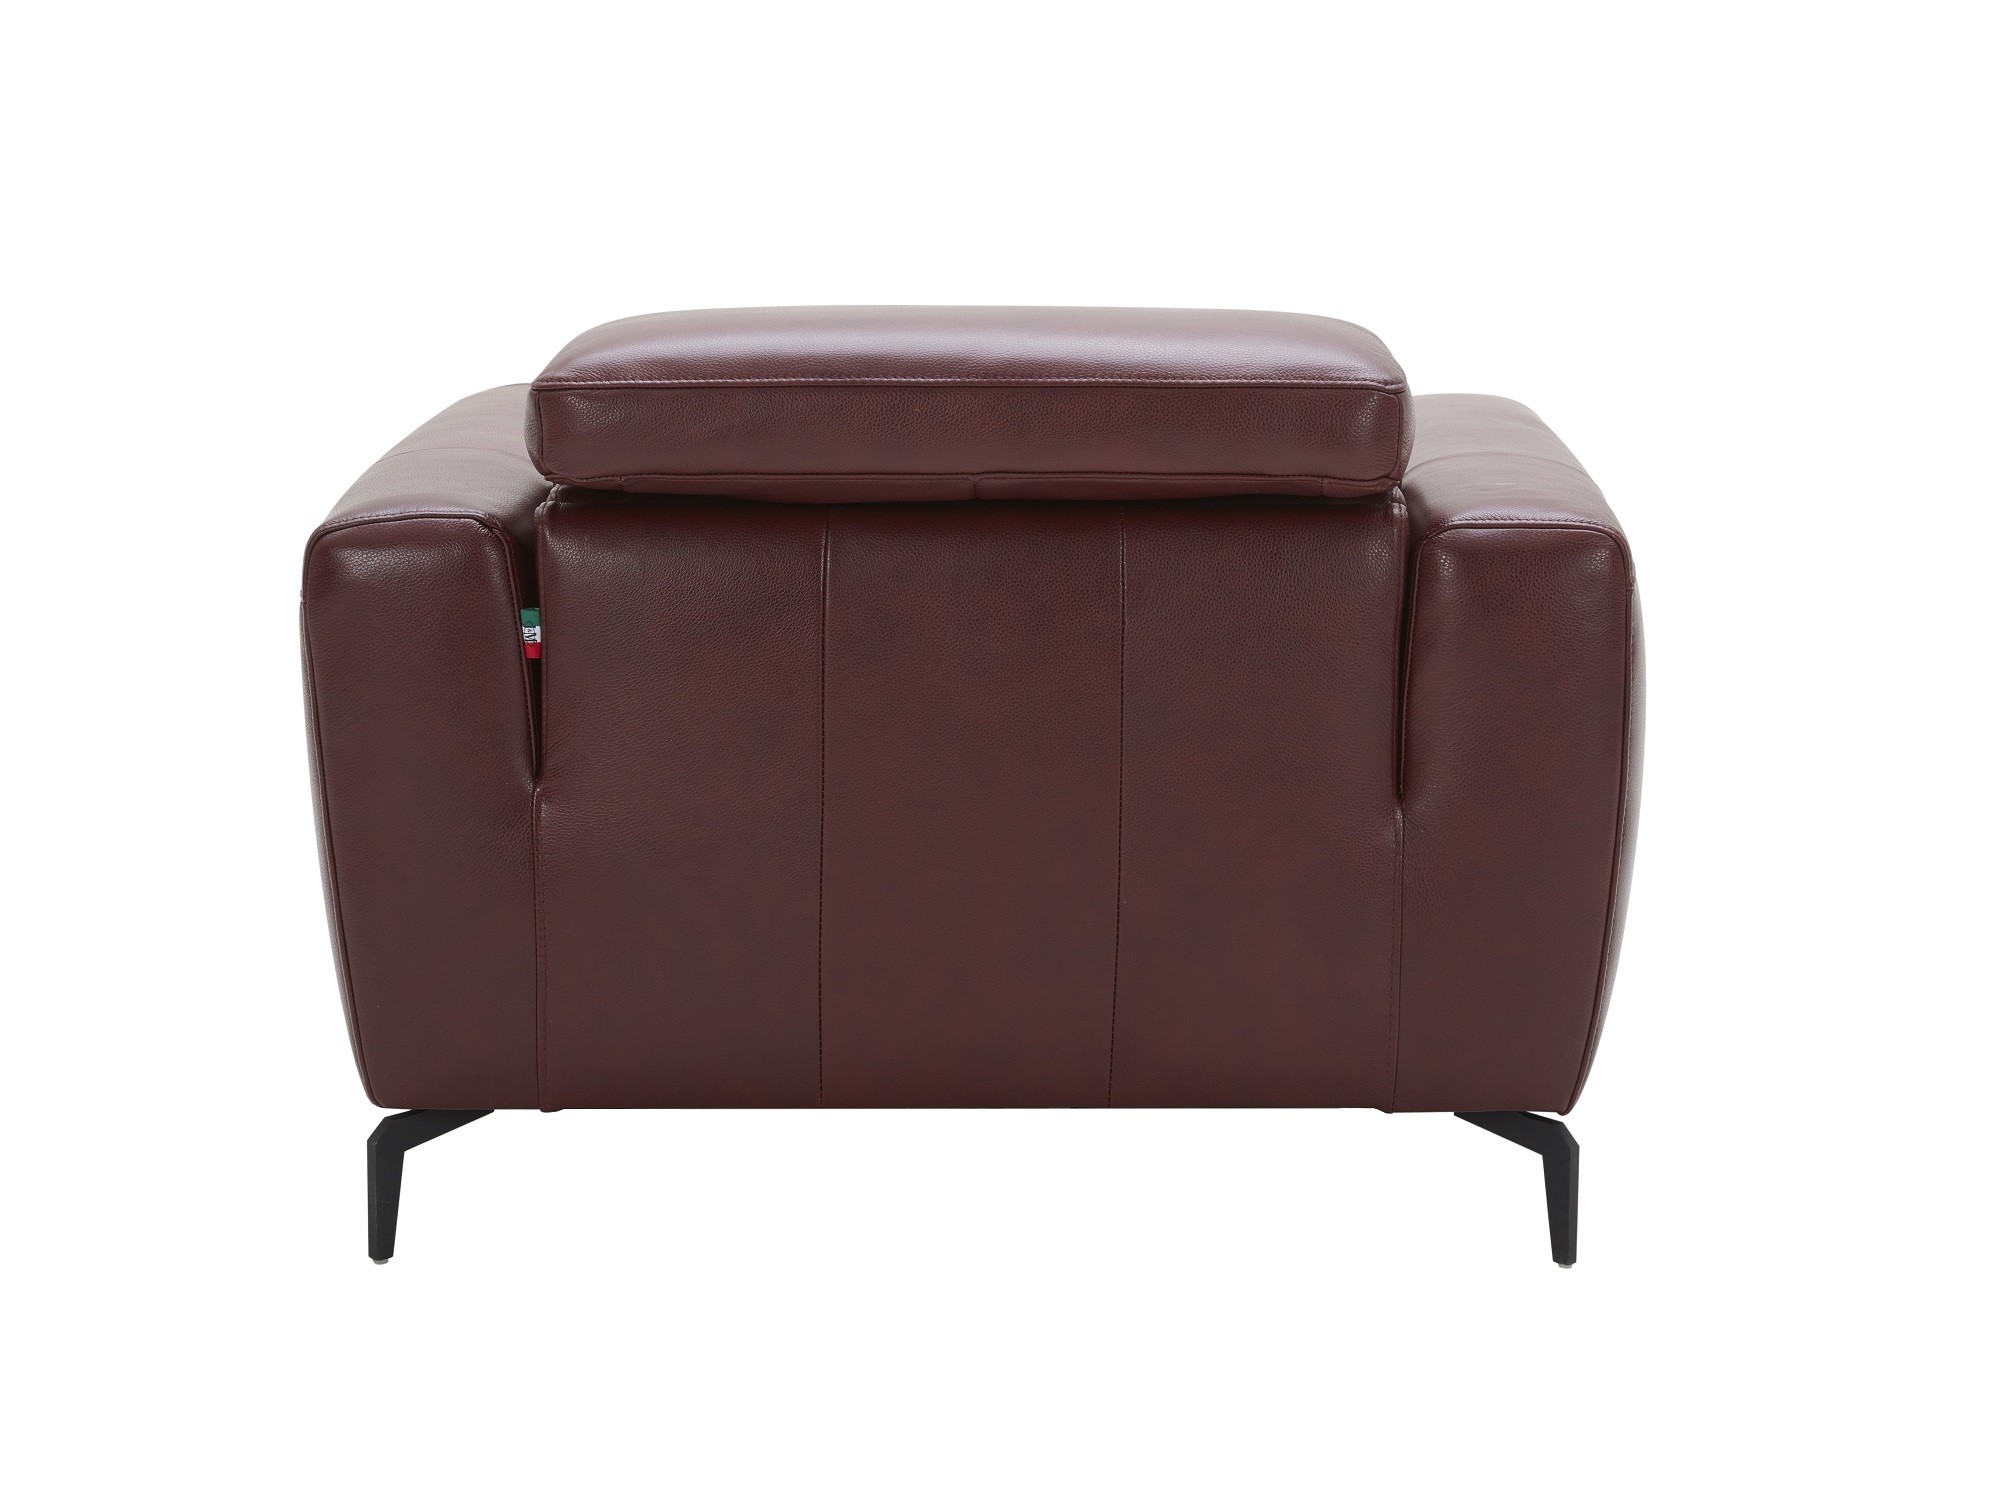 Top-Grain Leather Living Room Sofas